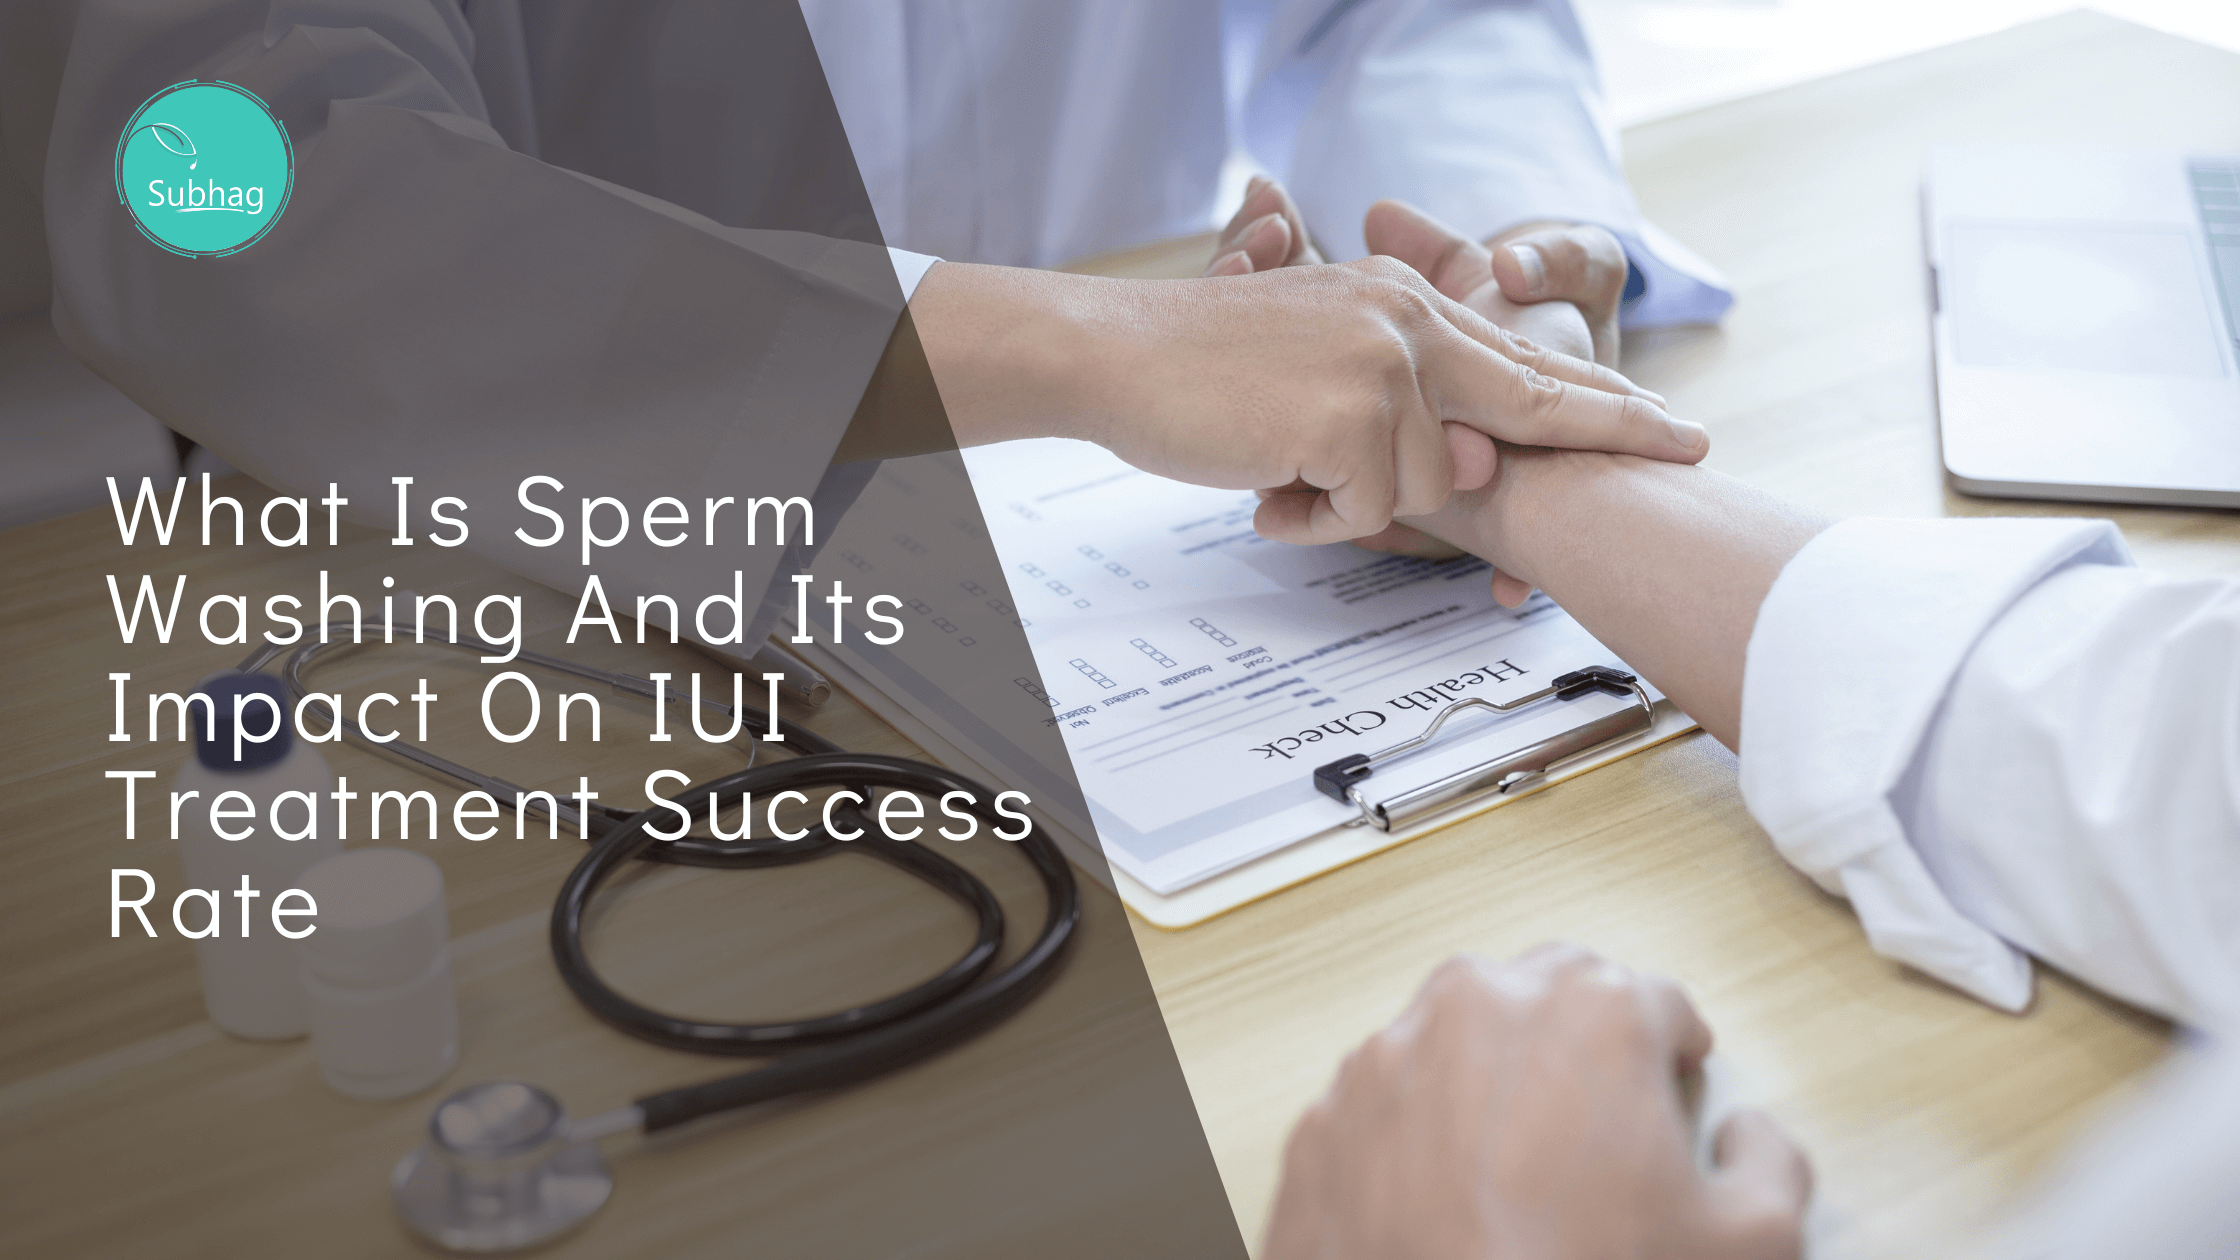 What Is Sperm Washing And Its Impact On IUI Treatment Success Rate